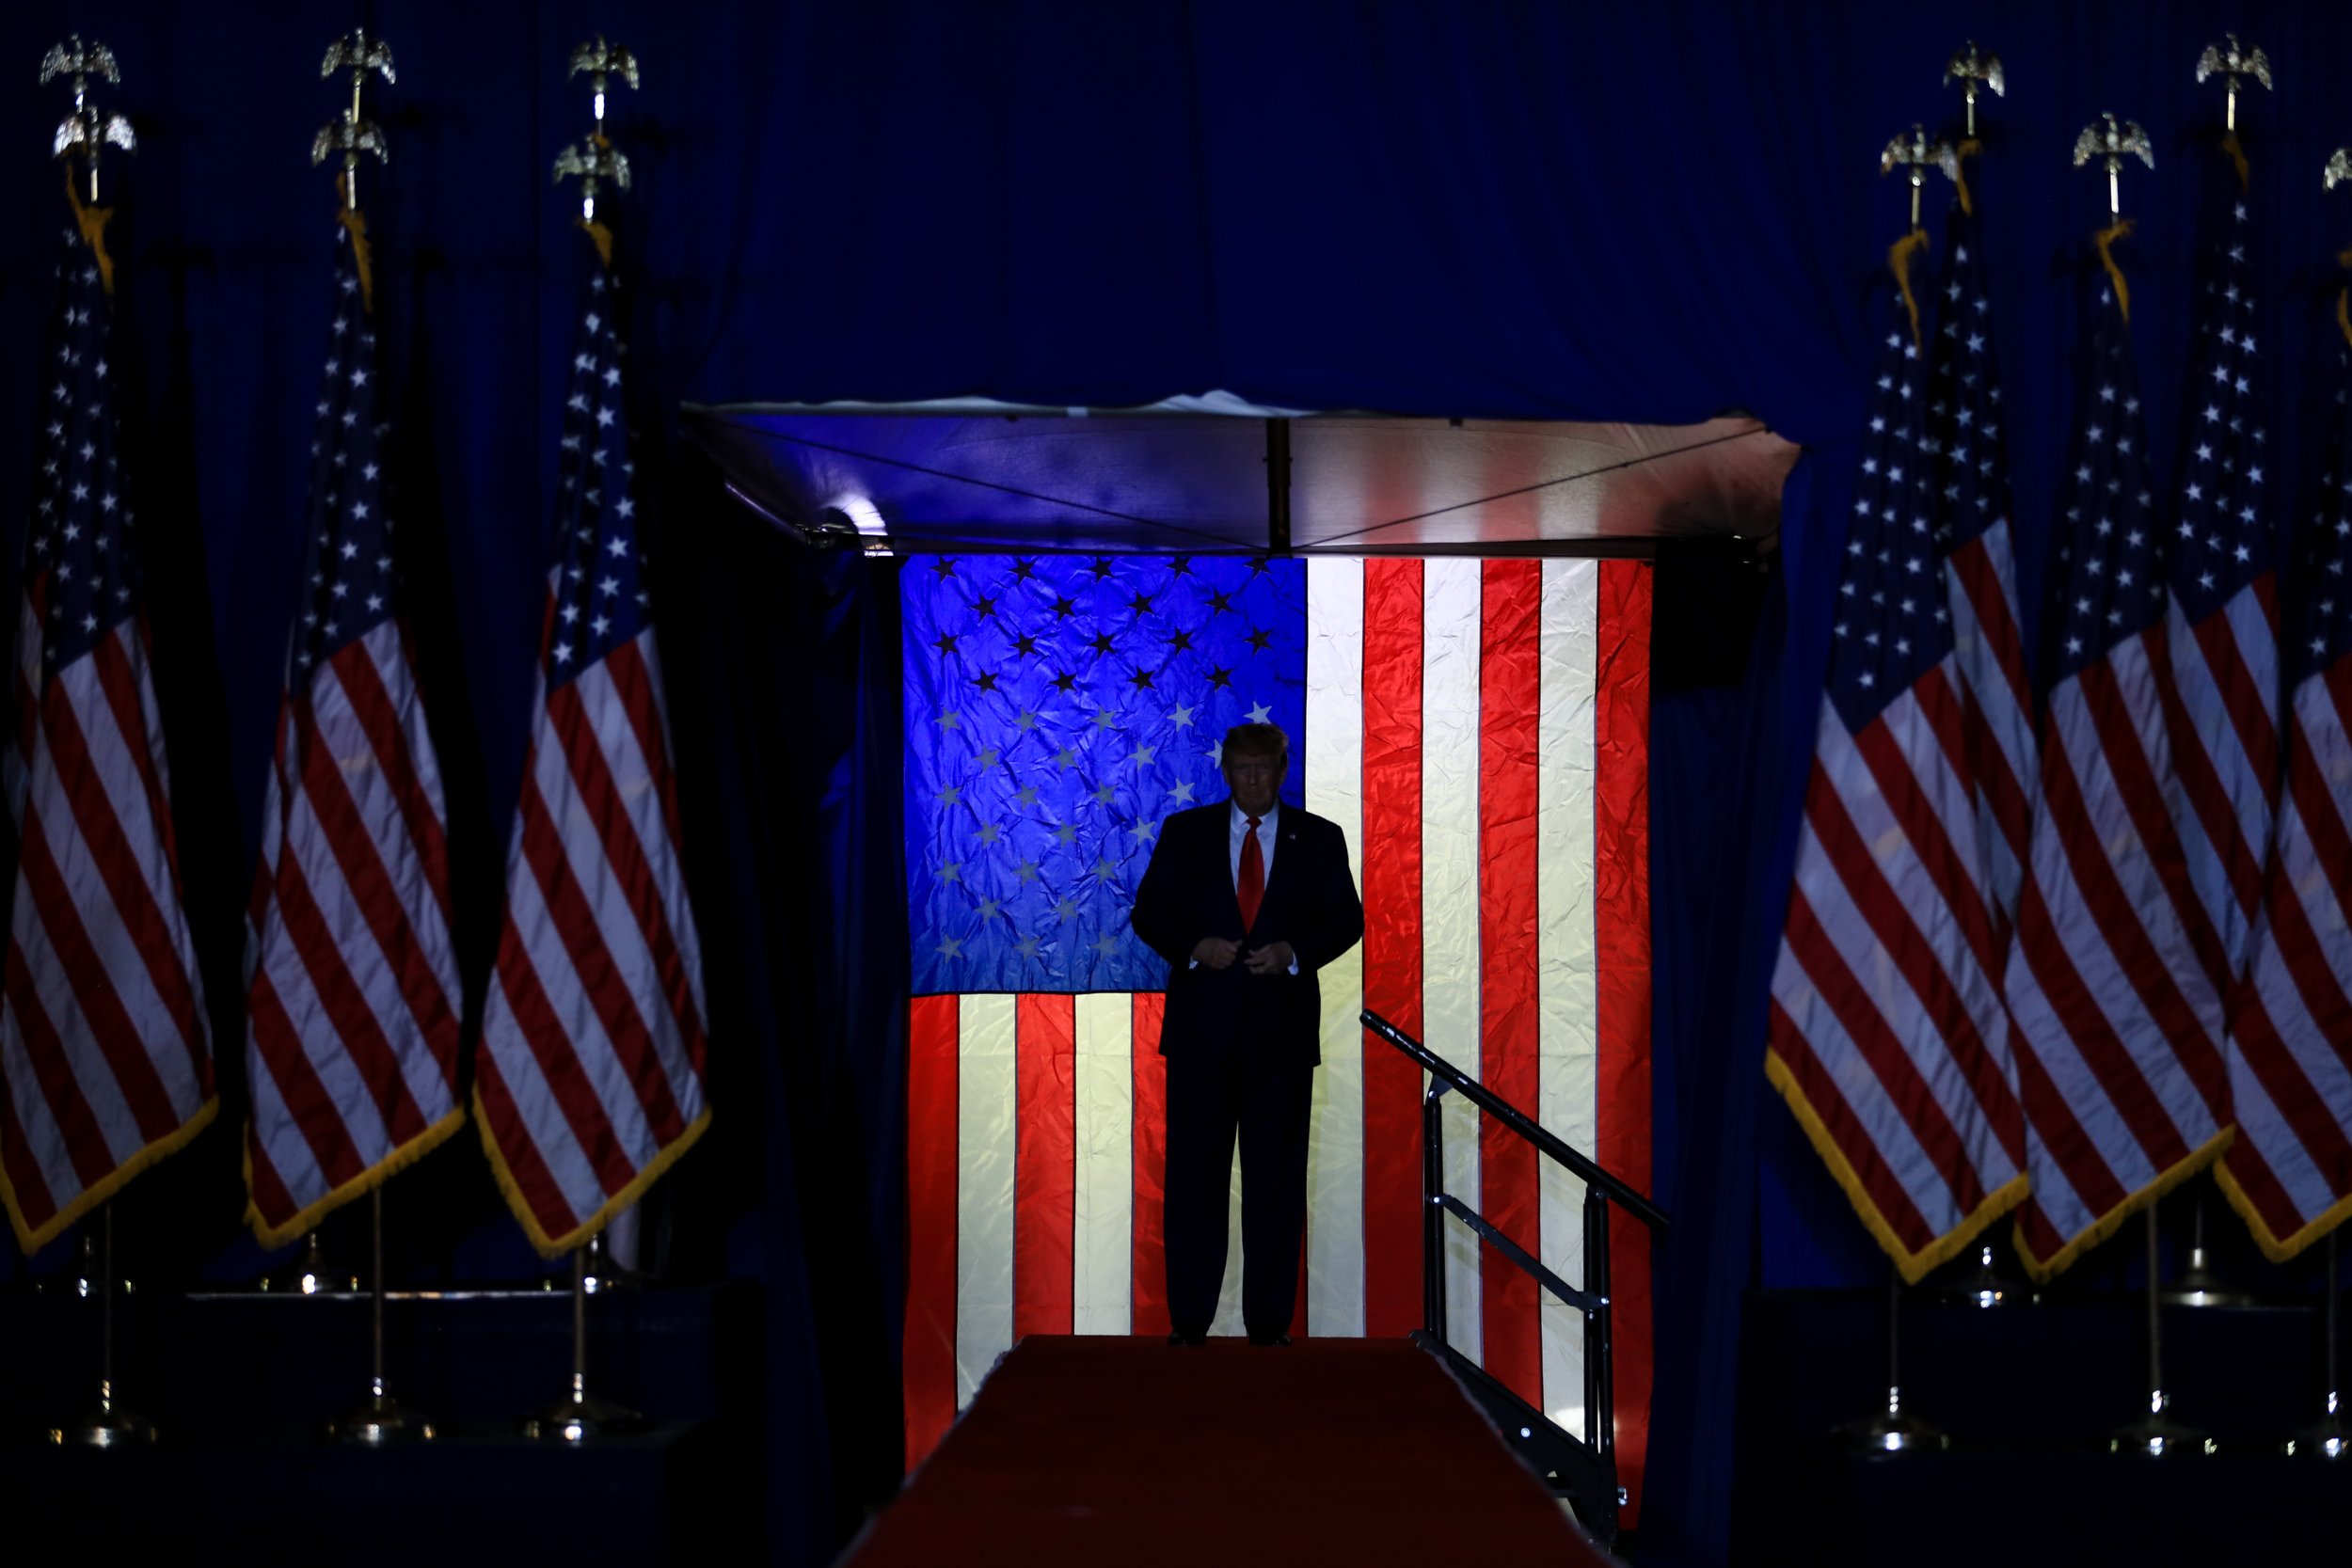  Former U.S. President Donald Trump makes his entrance into a rally held in Washington, Michigan U.S. April 2, 2022. (Emily Elconin for Reuters) 